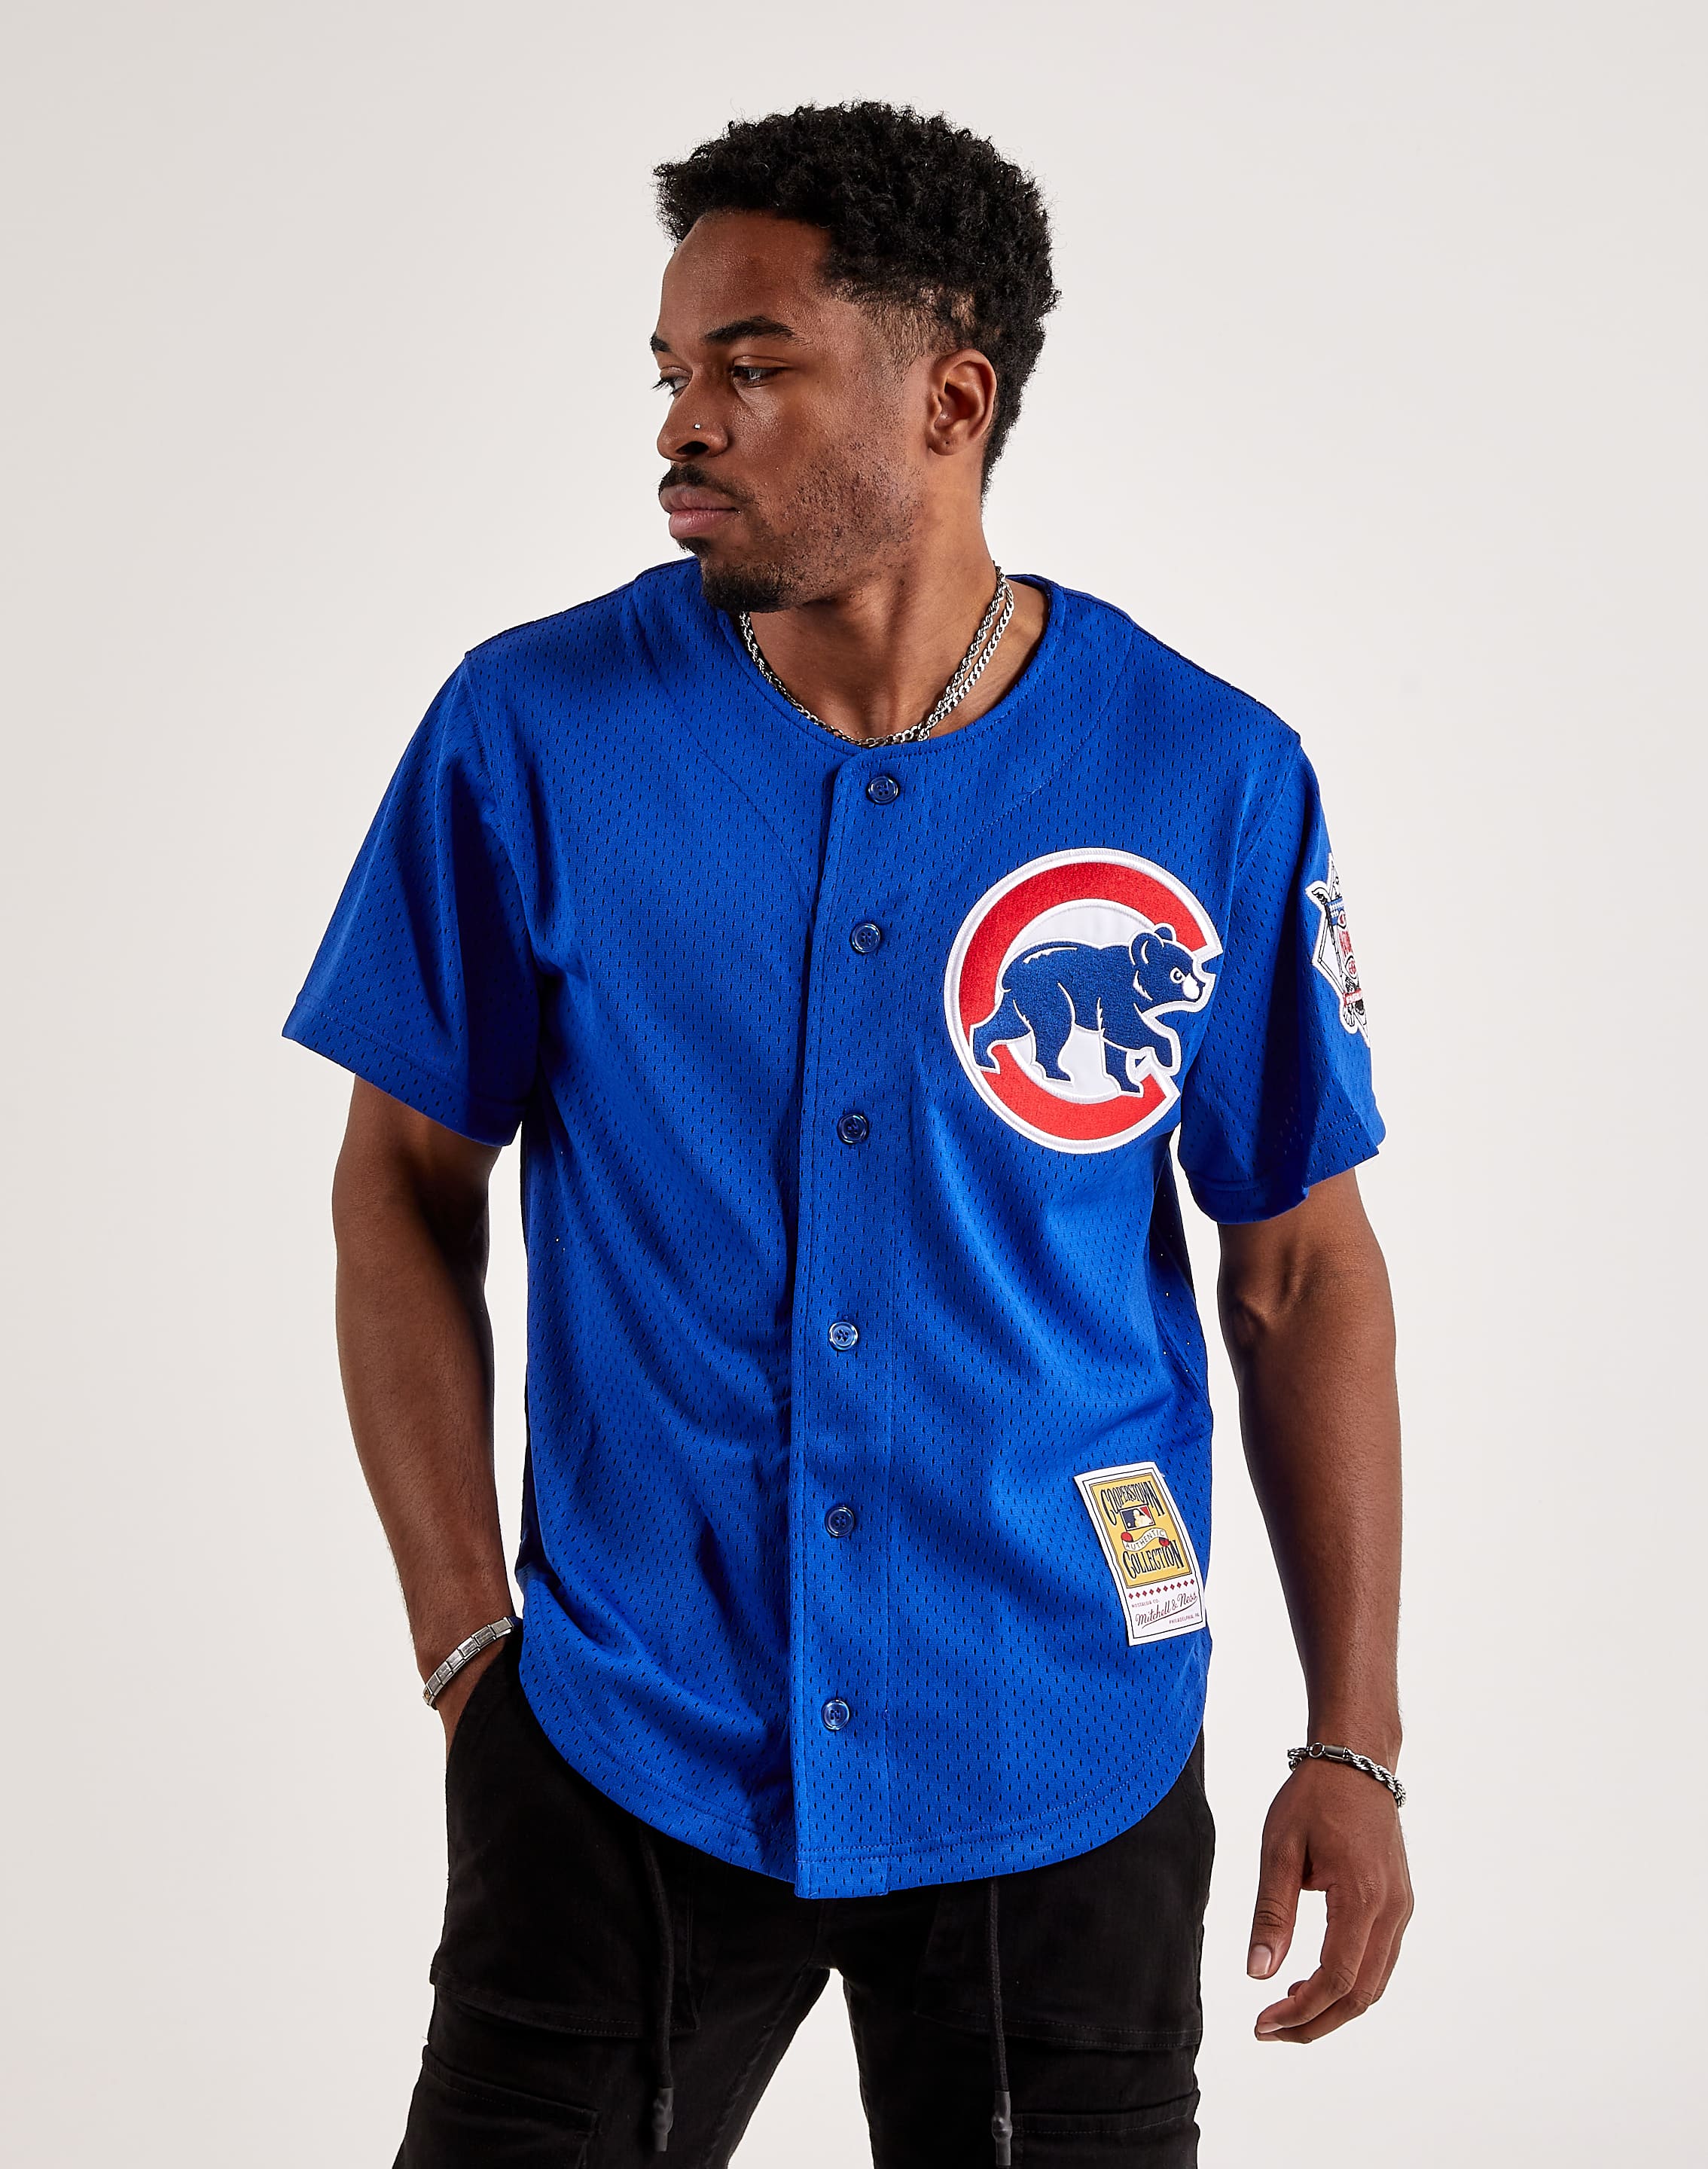 Mitchell & Ness Authentic Ryne Sandberg Chicago Cubs Jersey – DTLR